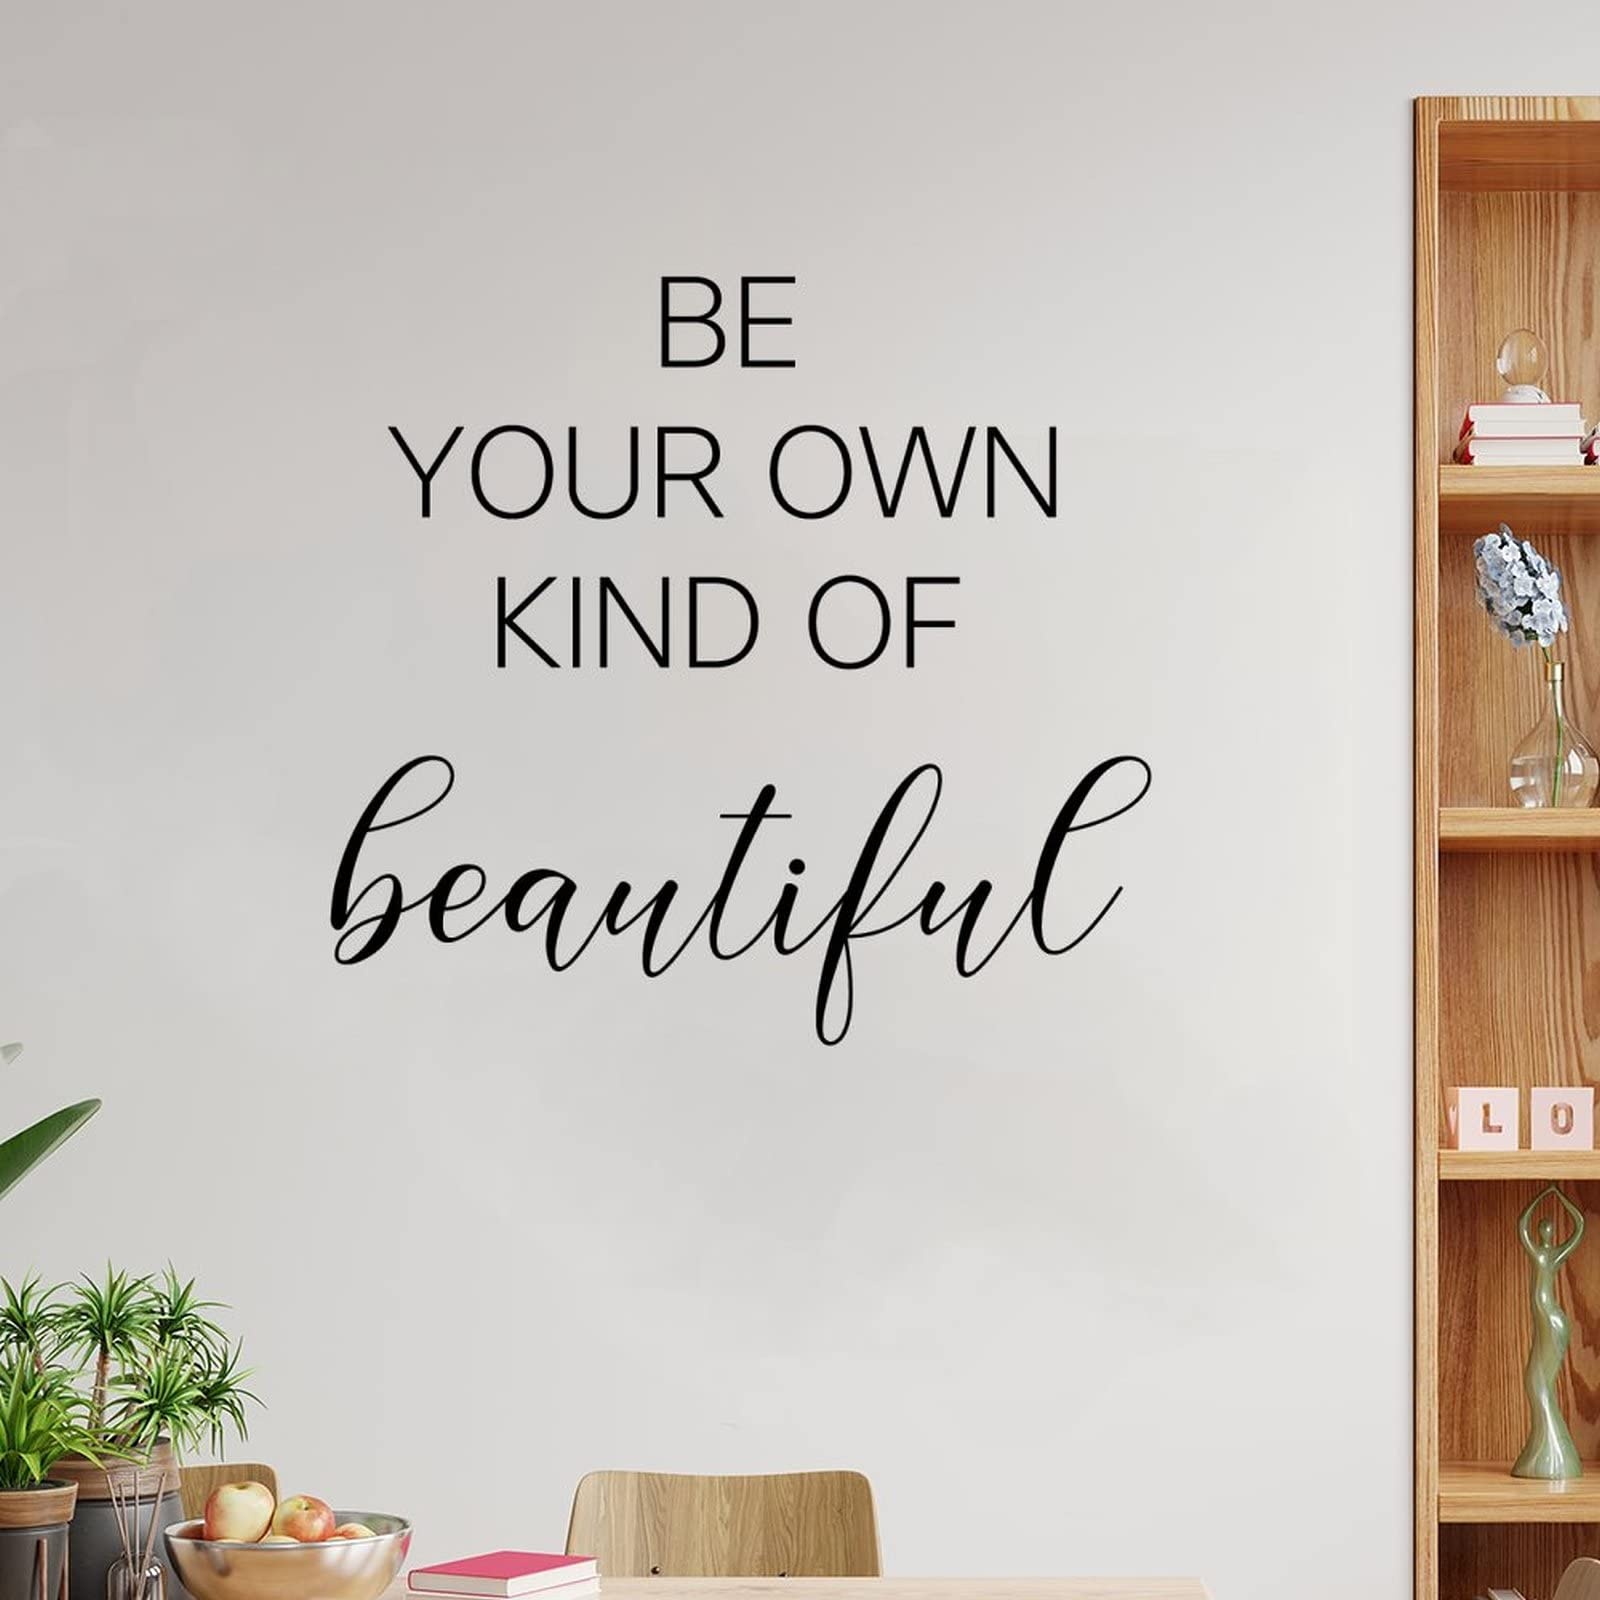 Wandaufkleber "Be Your Own Kind of Beautiful Removable Vinyl Decal Wall Art Words Letters Farmhouse Wall Decor Home Decoration for Girl Boy Bedroom Living Room Office" 78,9 cm